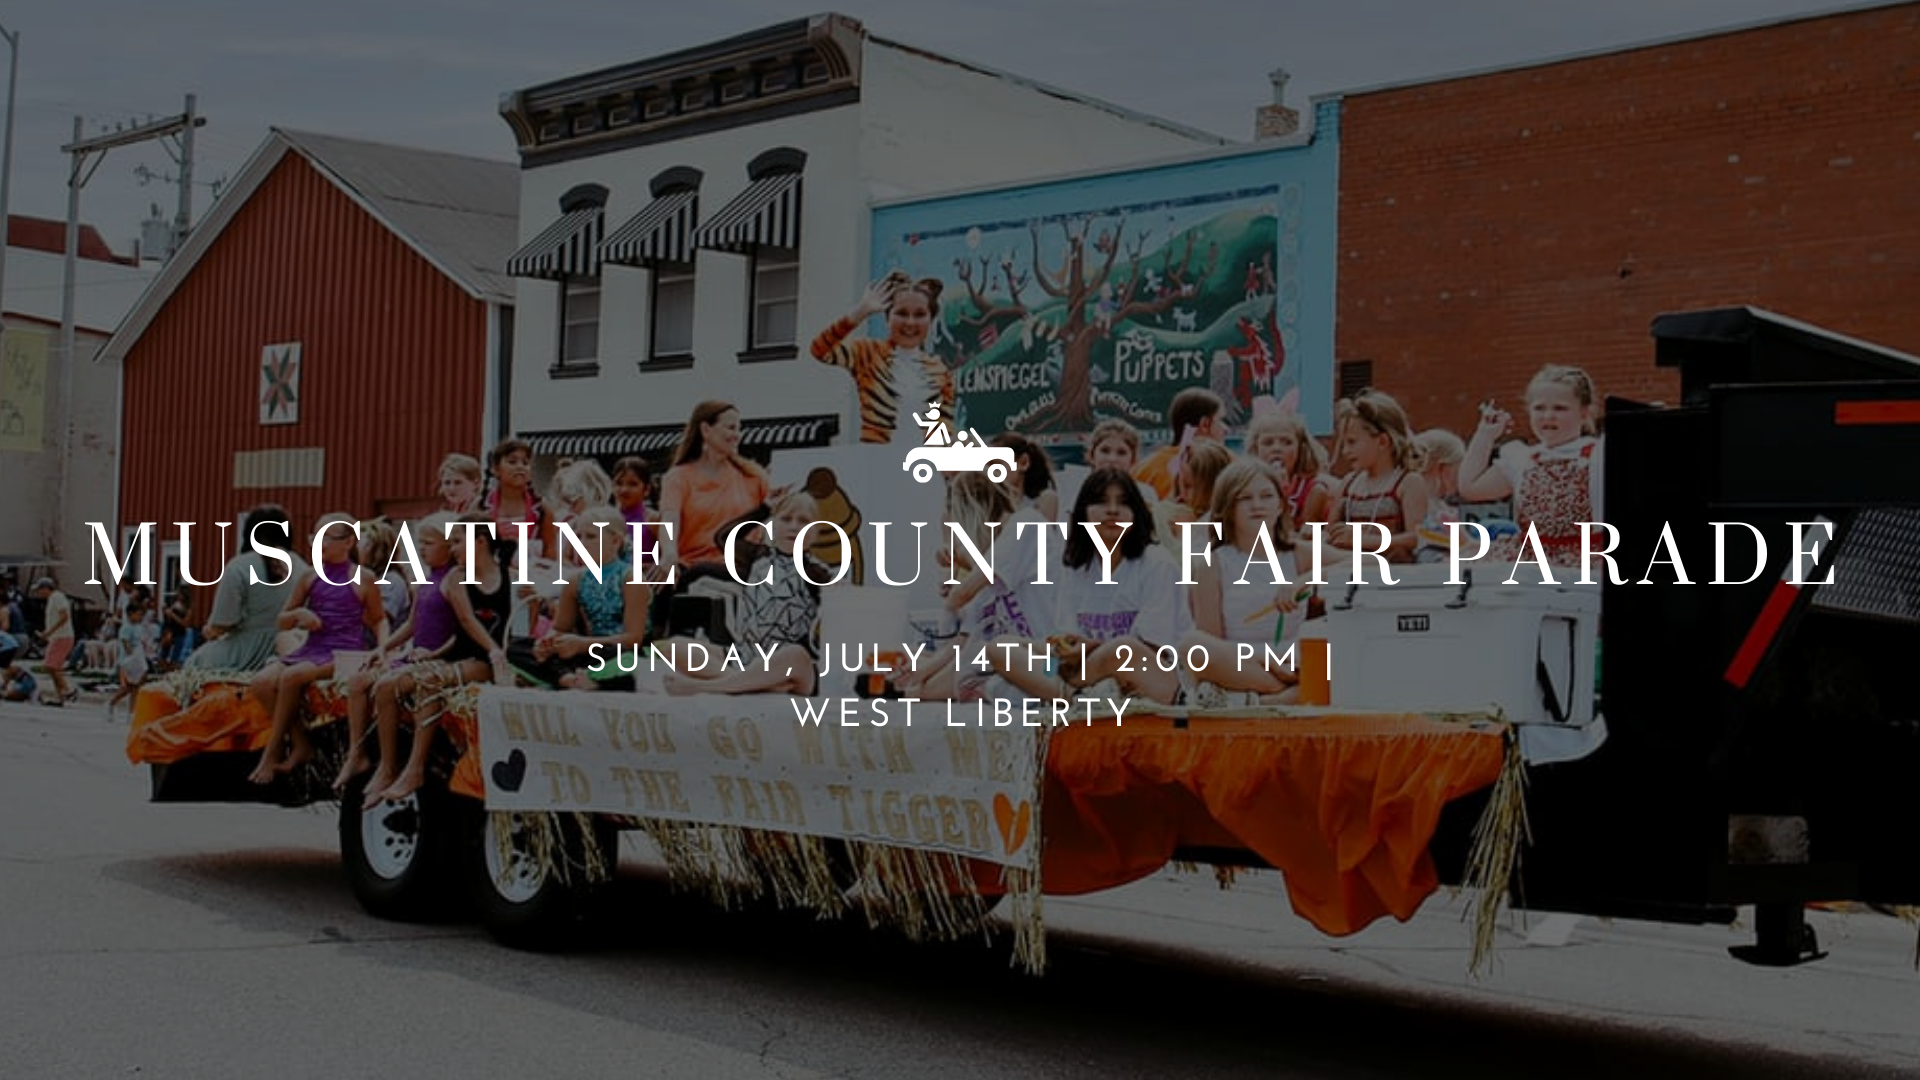 Muscatine County Fair Parade